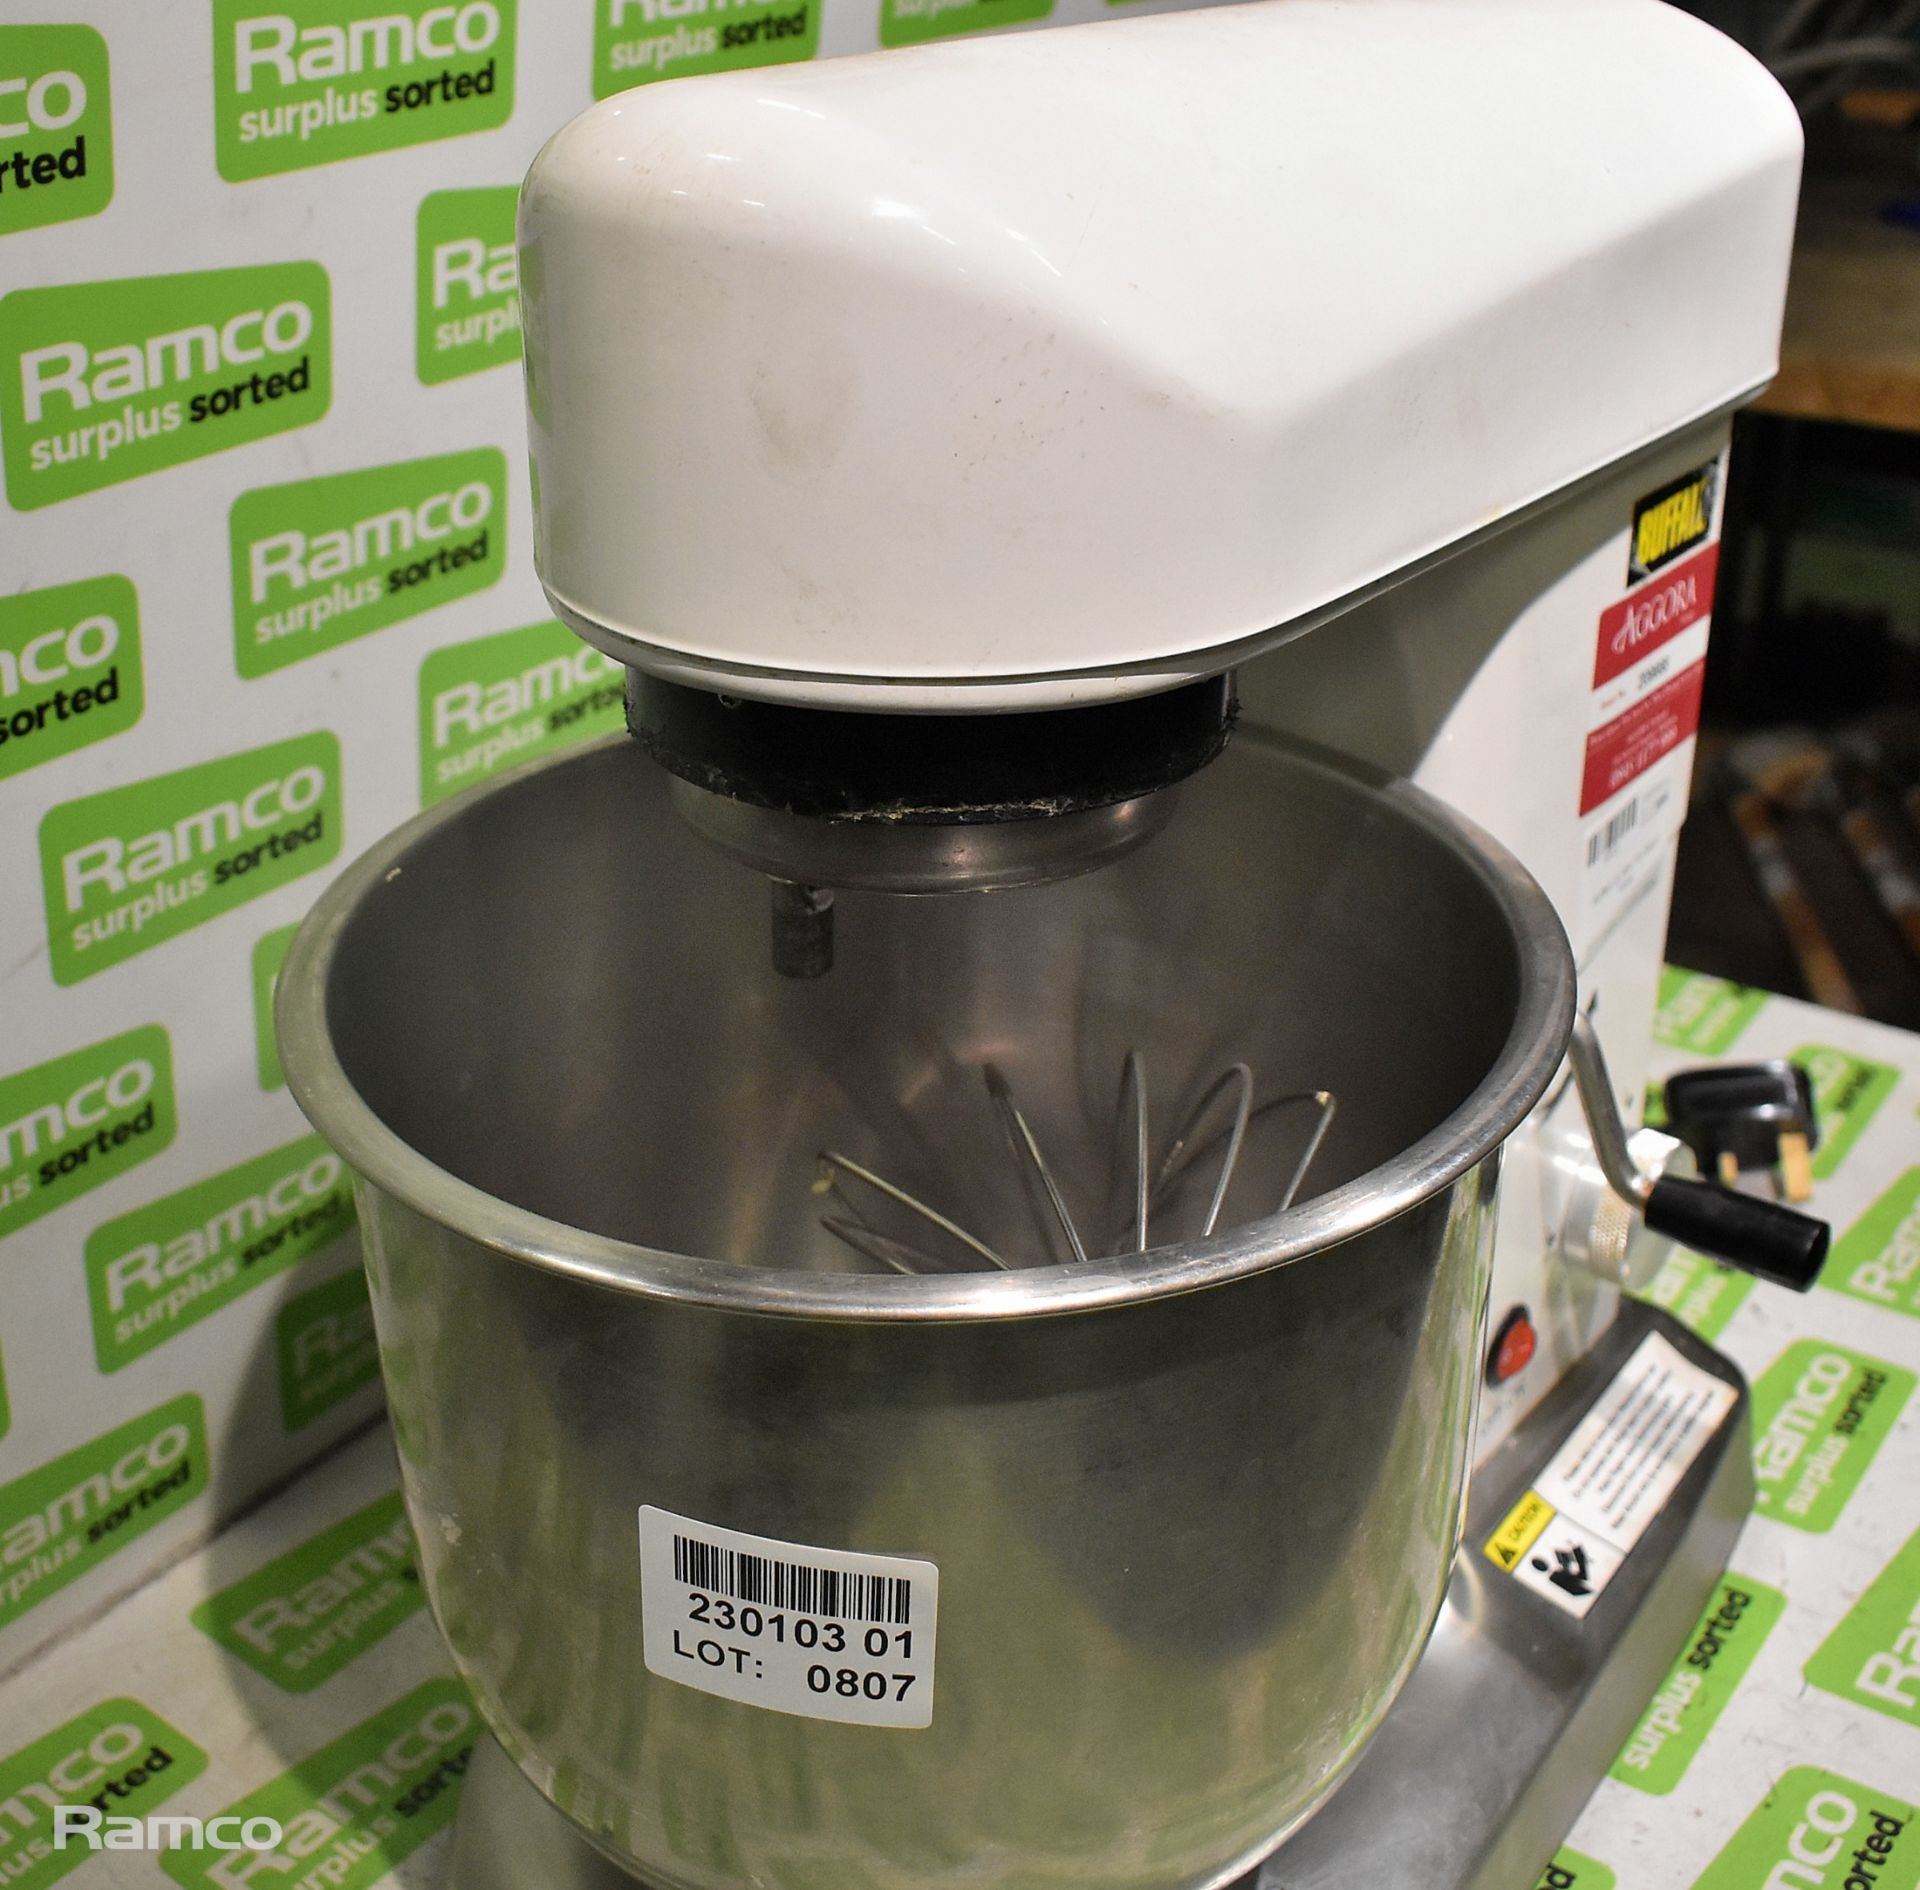 Buffalo GJ464 7ltr Stand Mixer - Image 3 of 4